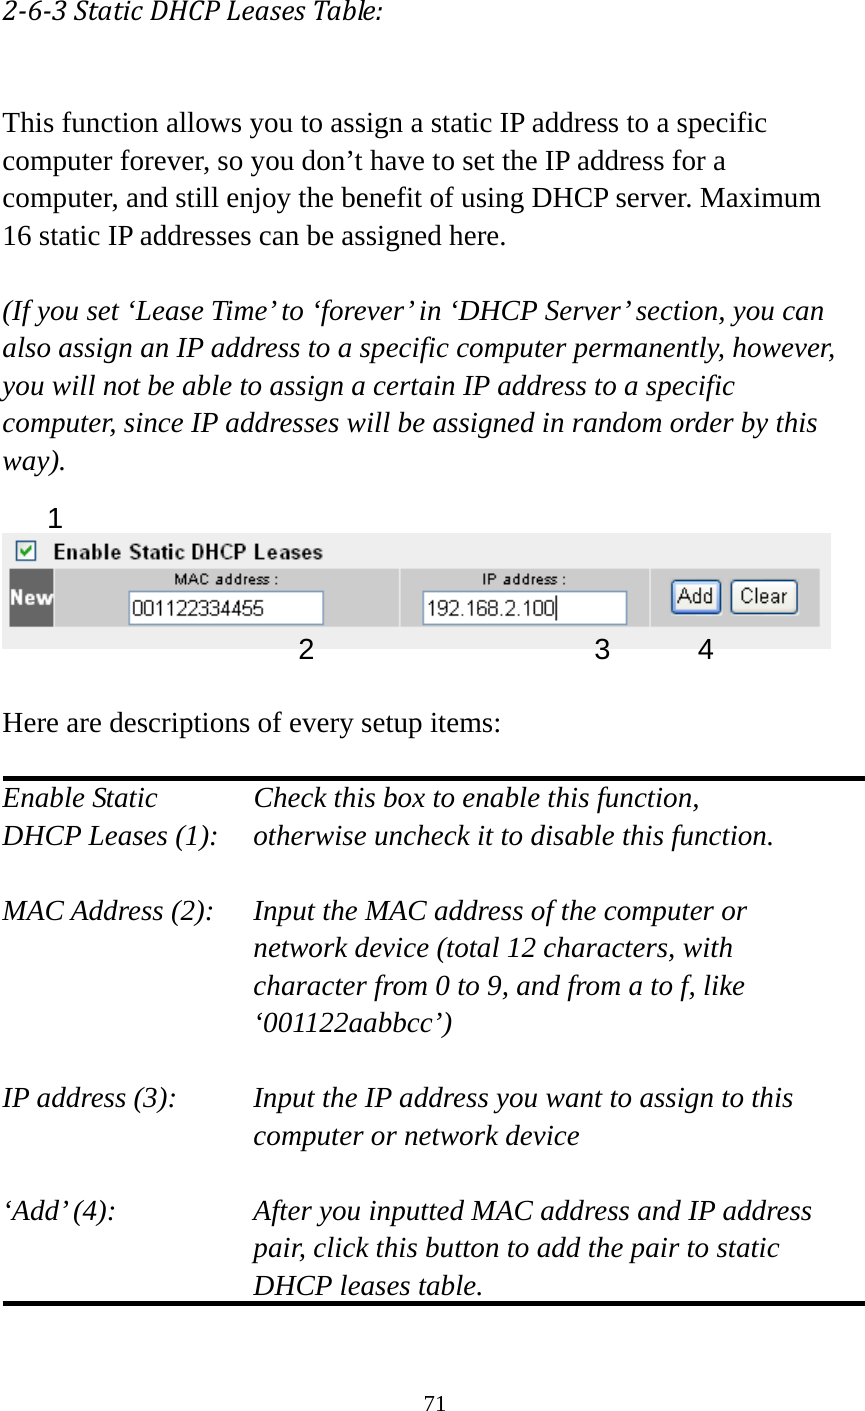 71  263StaticDHCPLeasesTable: This function allows you to assign a static IP address to a specific computer forever, so you don’t have to set the IP address for a computer, and still enjoy the benefit of using DHCP server. Maximum 16 static IP addresses can be assigned here.  (If you set ‘Lease Time’ to ‘forever’ in ‘DHCP Server’ section, you can also assign an IP address to a specific computer permanently, however, you will not be able to assign a certain IP address to a specific computer, since IP addresses will be assigned in random order by this way).     Here are descriptions of every setup items:  Enable Static      Check this box to enable this function, DHCP Leases (1):    otherwise uncheck it to disable this function.  MAC Address (2):    Input the MAC address of the computer or network device (total 12 characters, with character from 0 to 9, and from a to f, like ‘001122aabbcc’)   IP address (3):    Input the IP address you want to assign to this computer or network device    ‘Add’ (4):    After you inputted MAC address and IP address pair, click this button to add the pair to static DHCP leases table.  1 2 3 4 